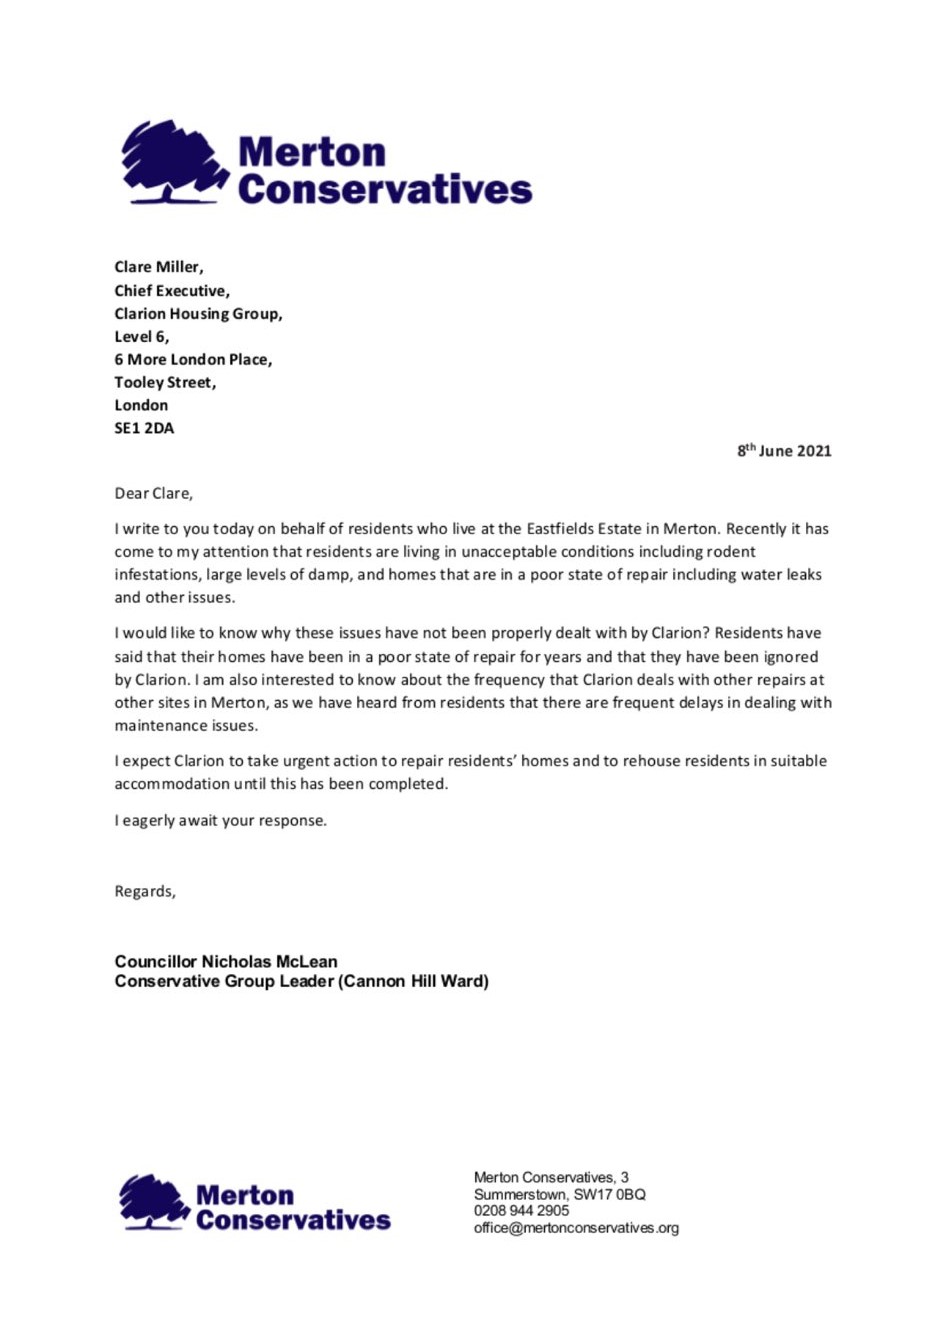 Letter from Cllr Nick McLean to the CEO of Clarion Housing Group. Dated June 8th.